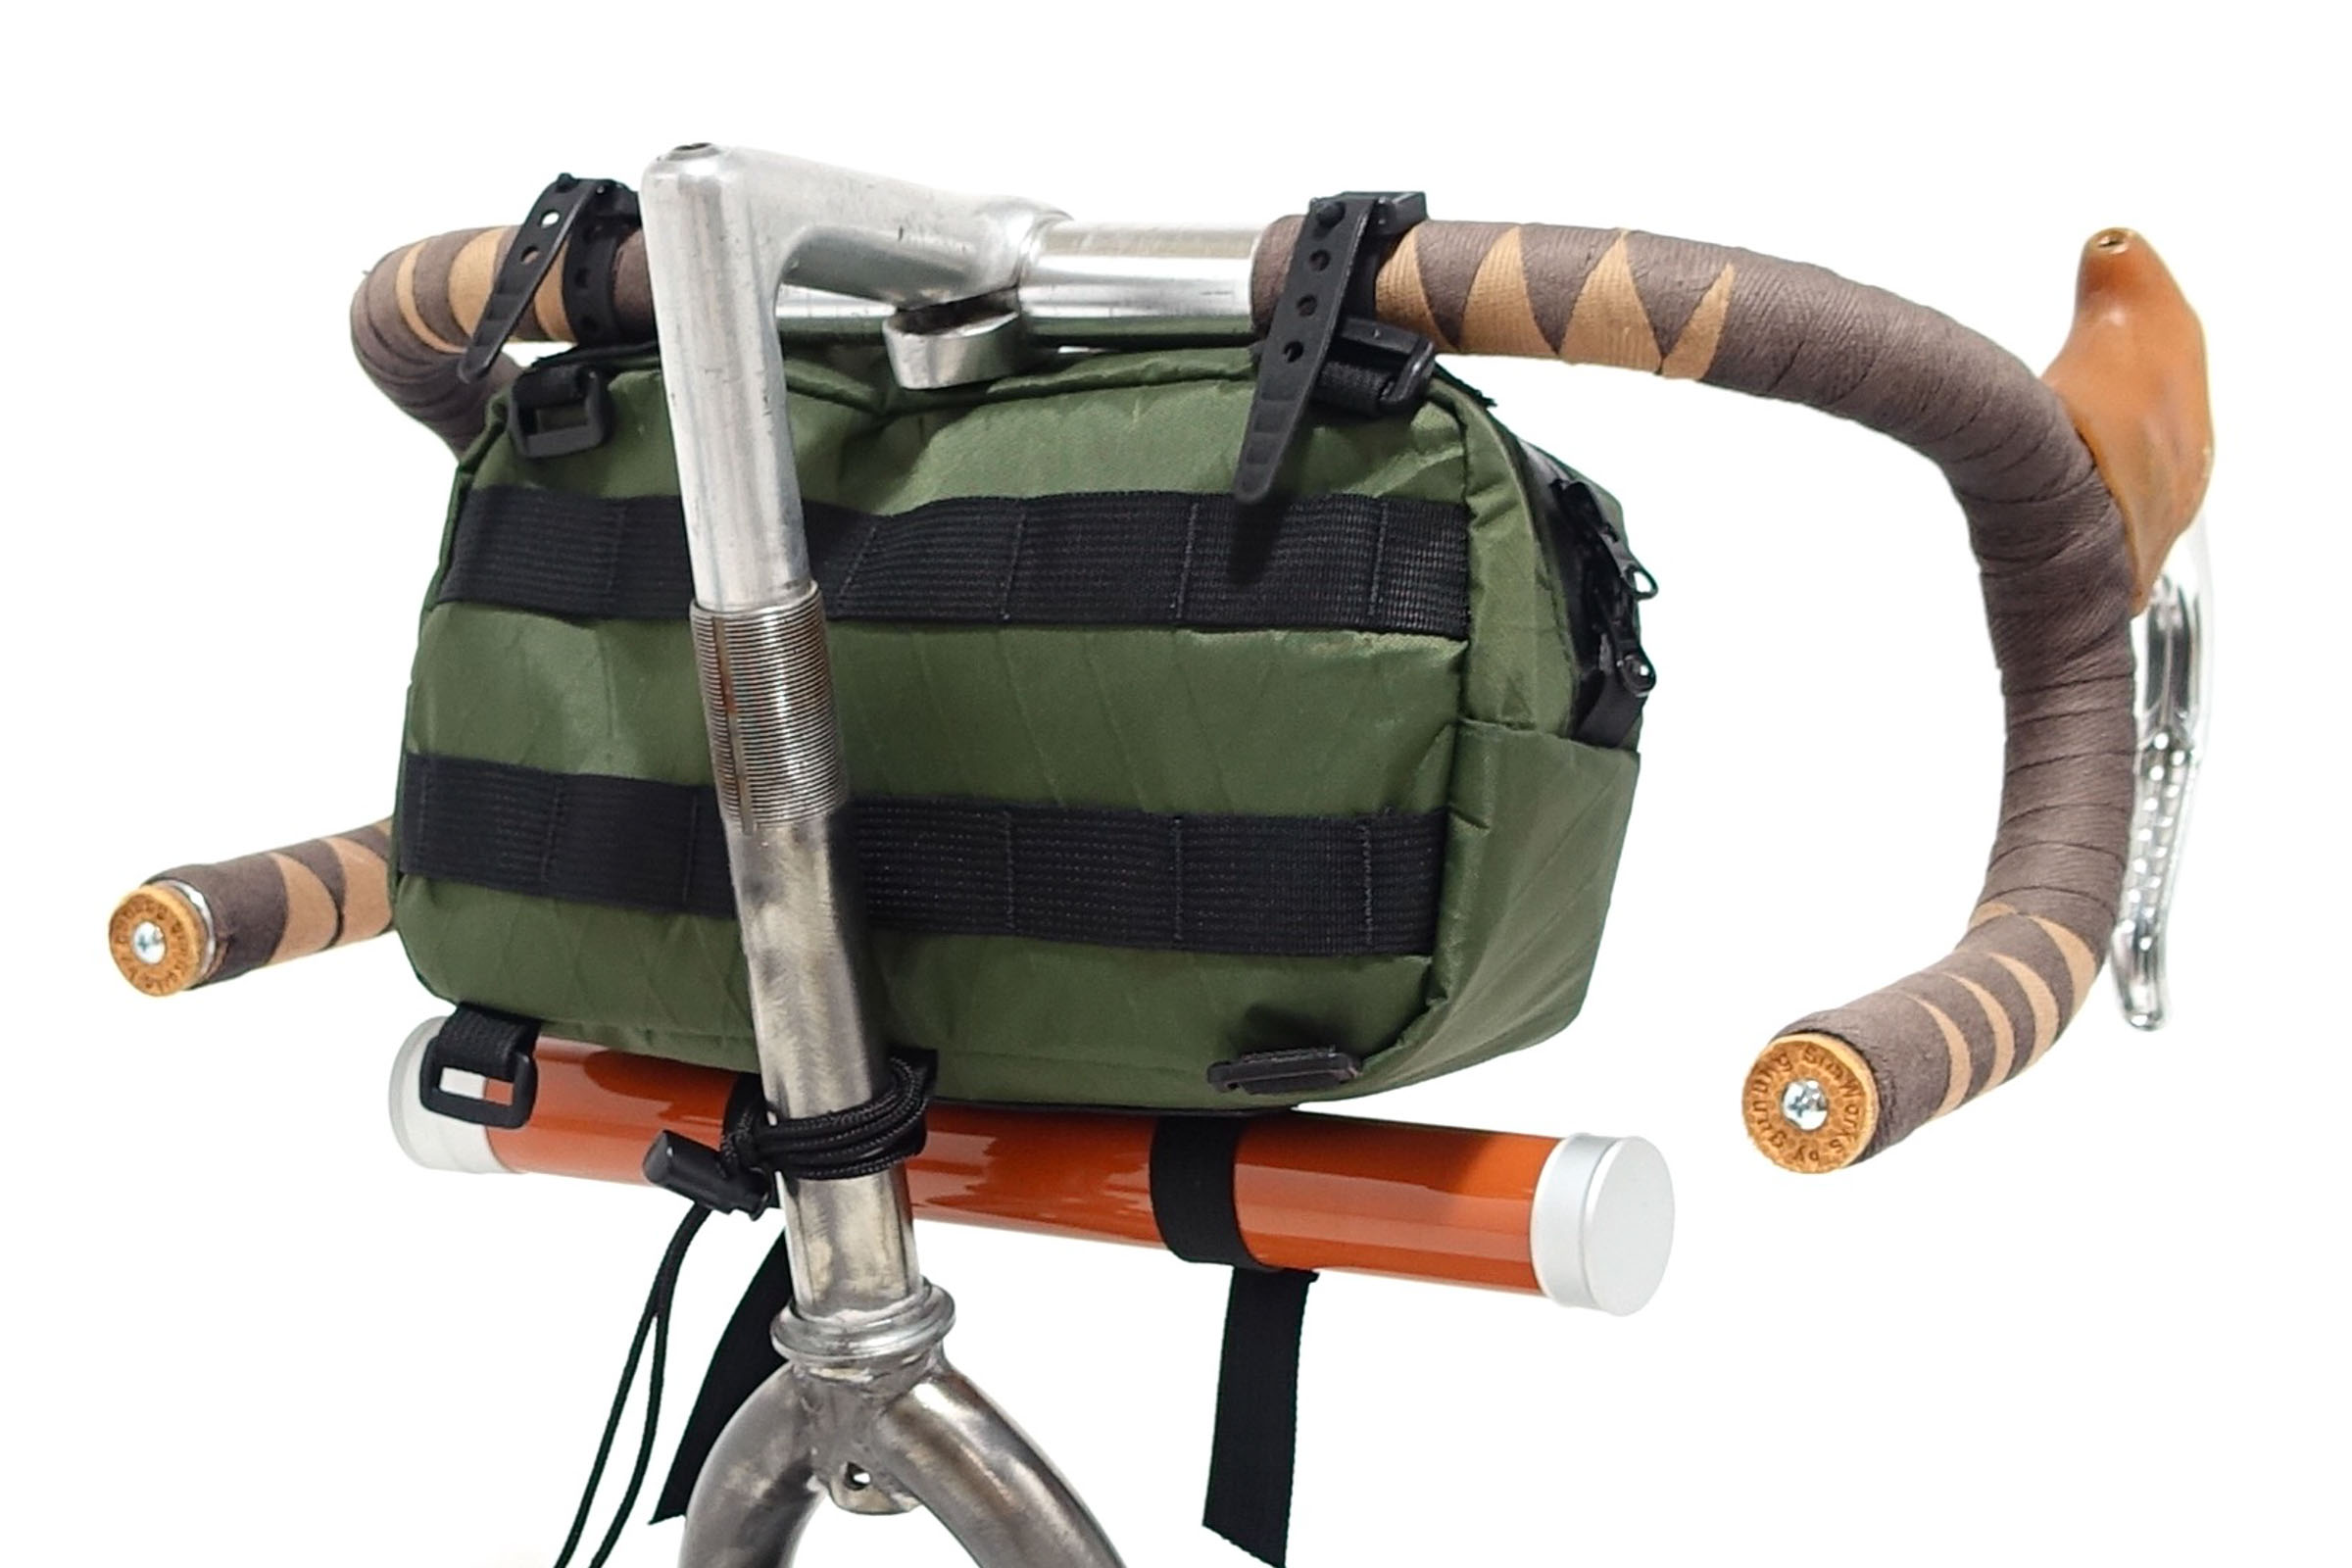 Three New Bags from Swift Industries - BIKEPACKING.com